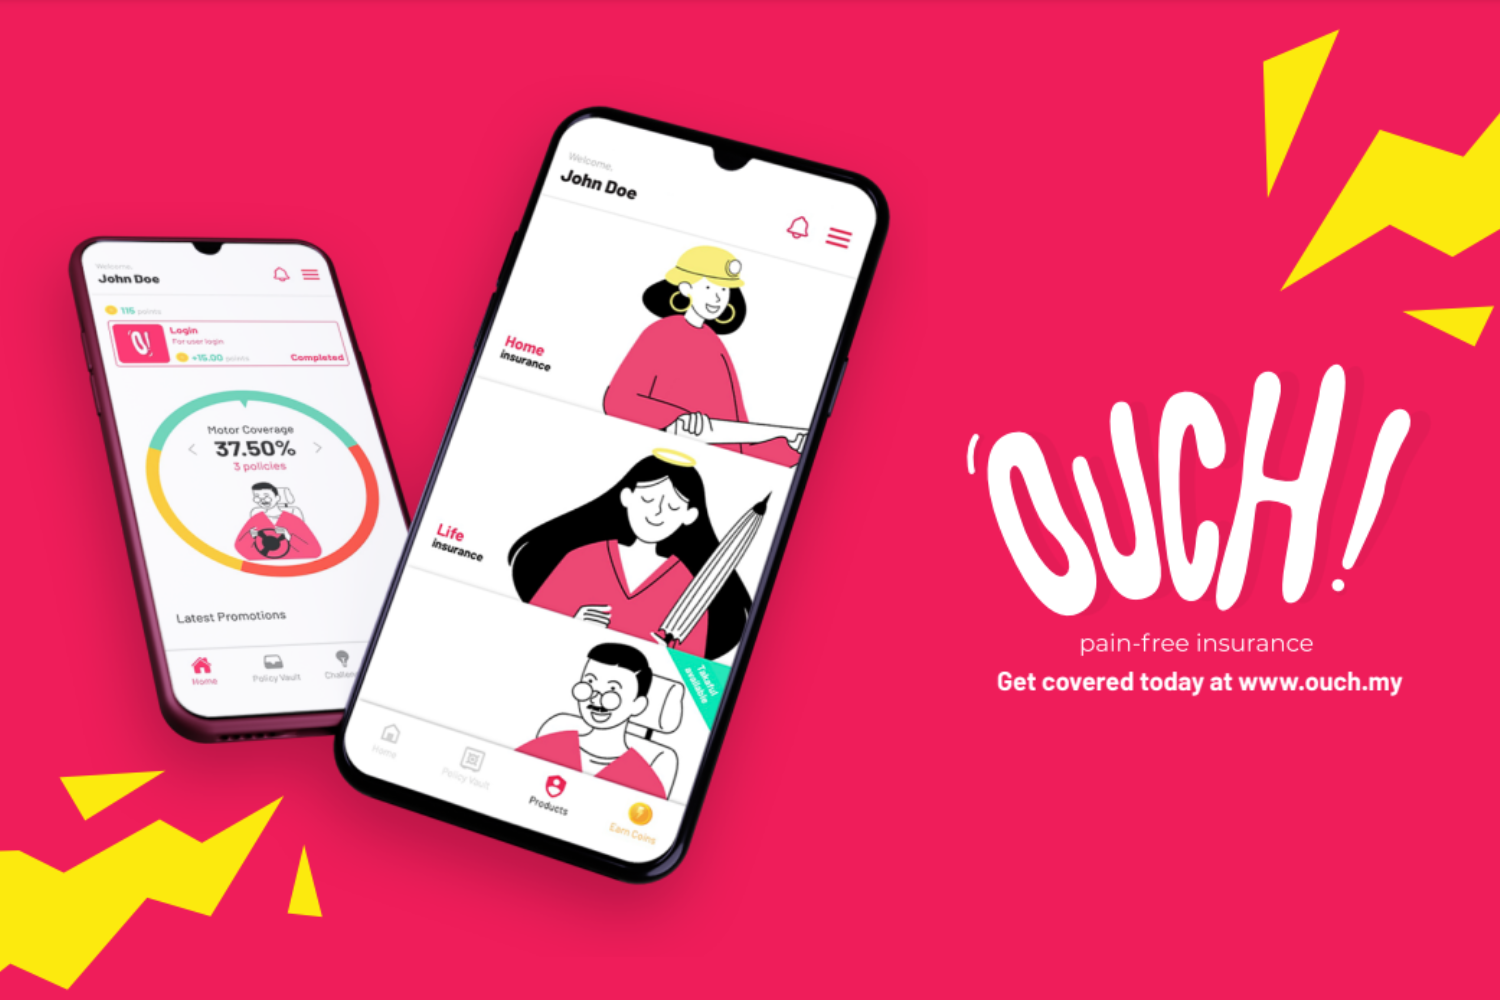 Insurance technology firm Ouch! aims to be Malaysia’s first digital takaful operator